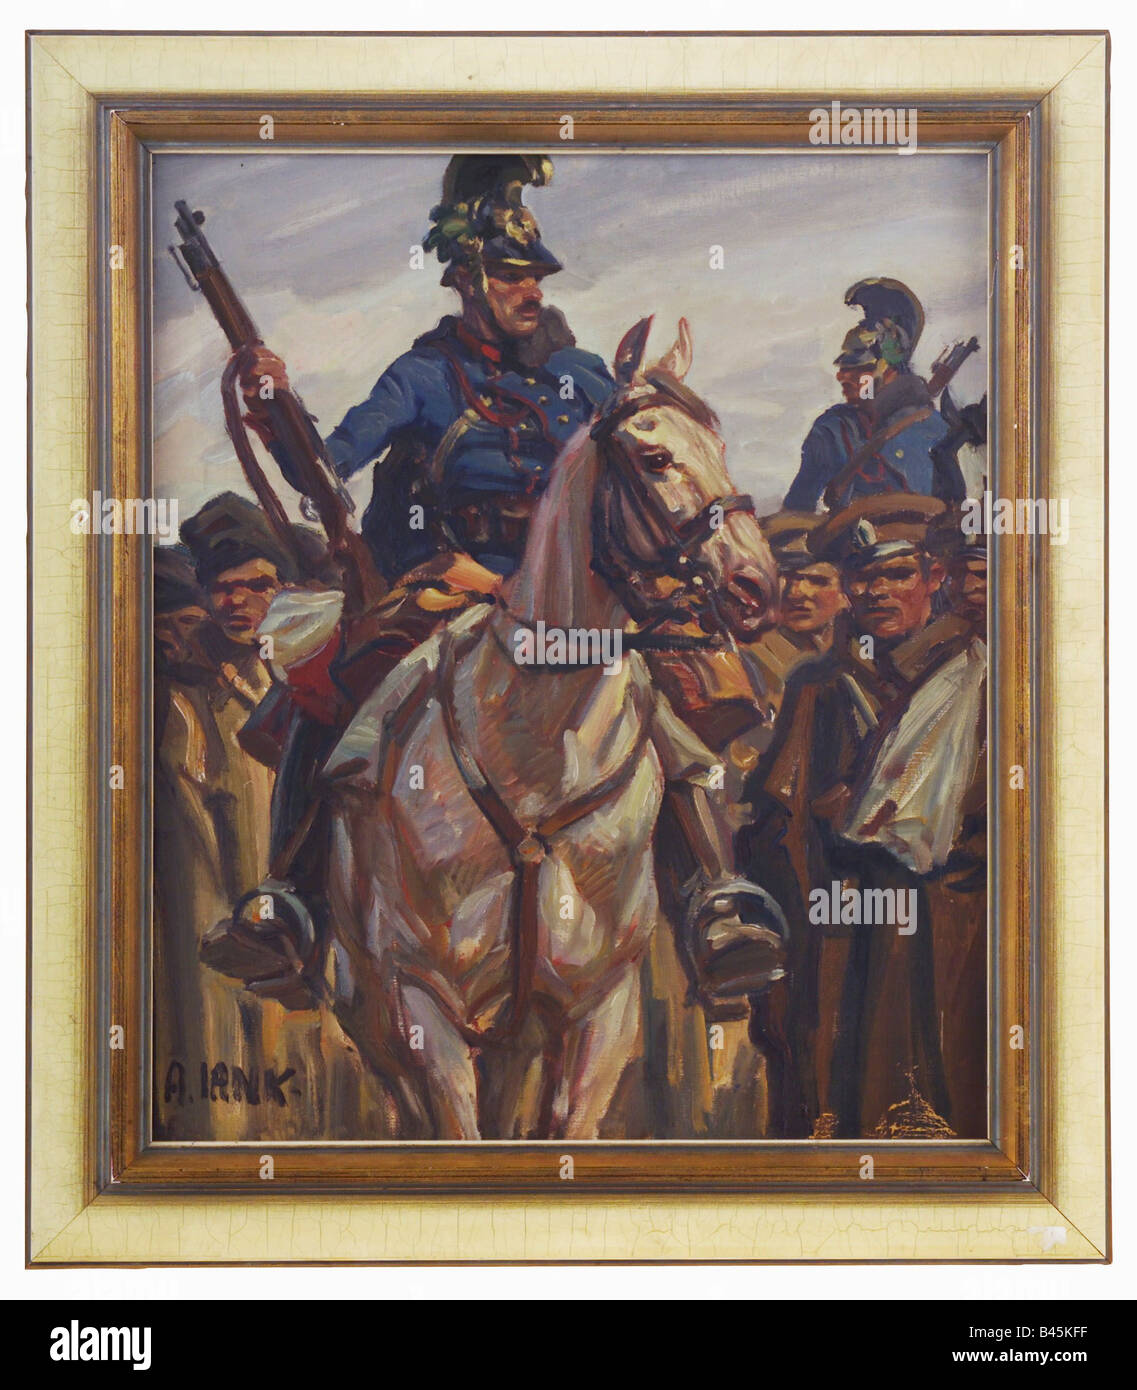 events, First World War/WWI, Prisoners of War, Austrian dragoons & captured Russians, circa 1915, painting by Angelo Jank (1868 - 1940), Stock Photo